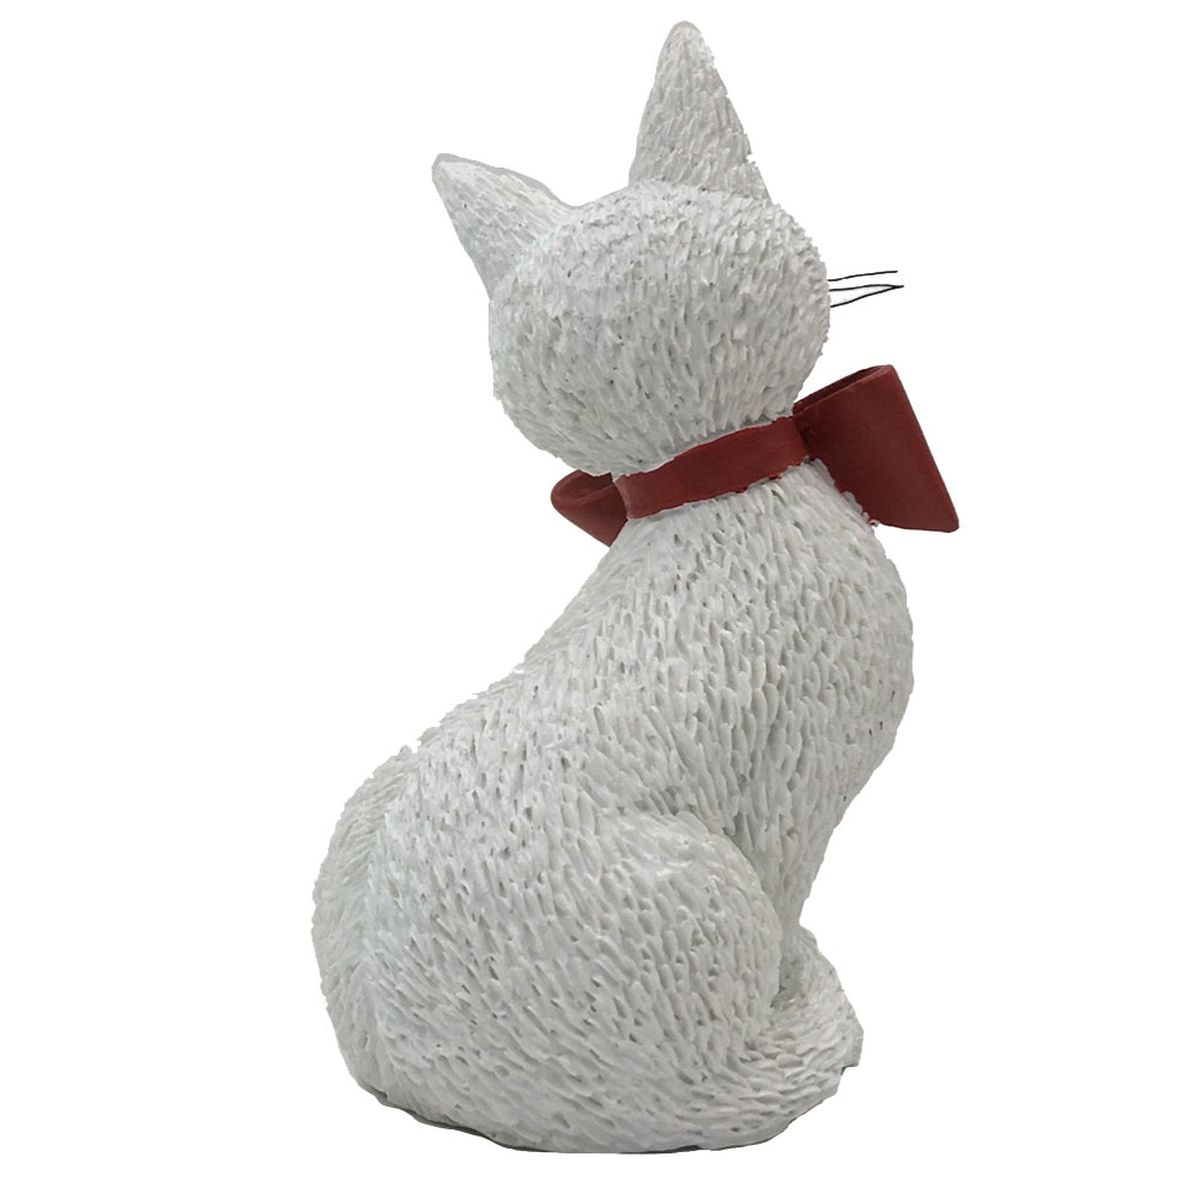 Cats by Dubout Figurine - So Chic white